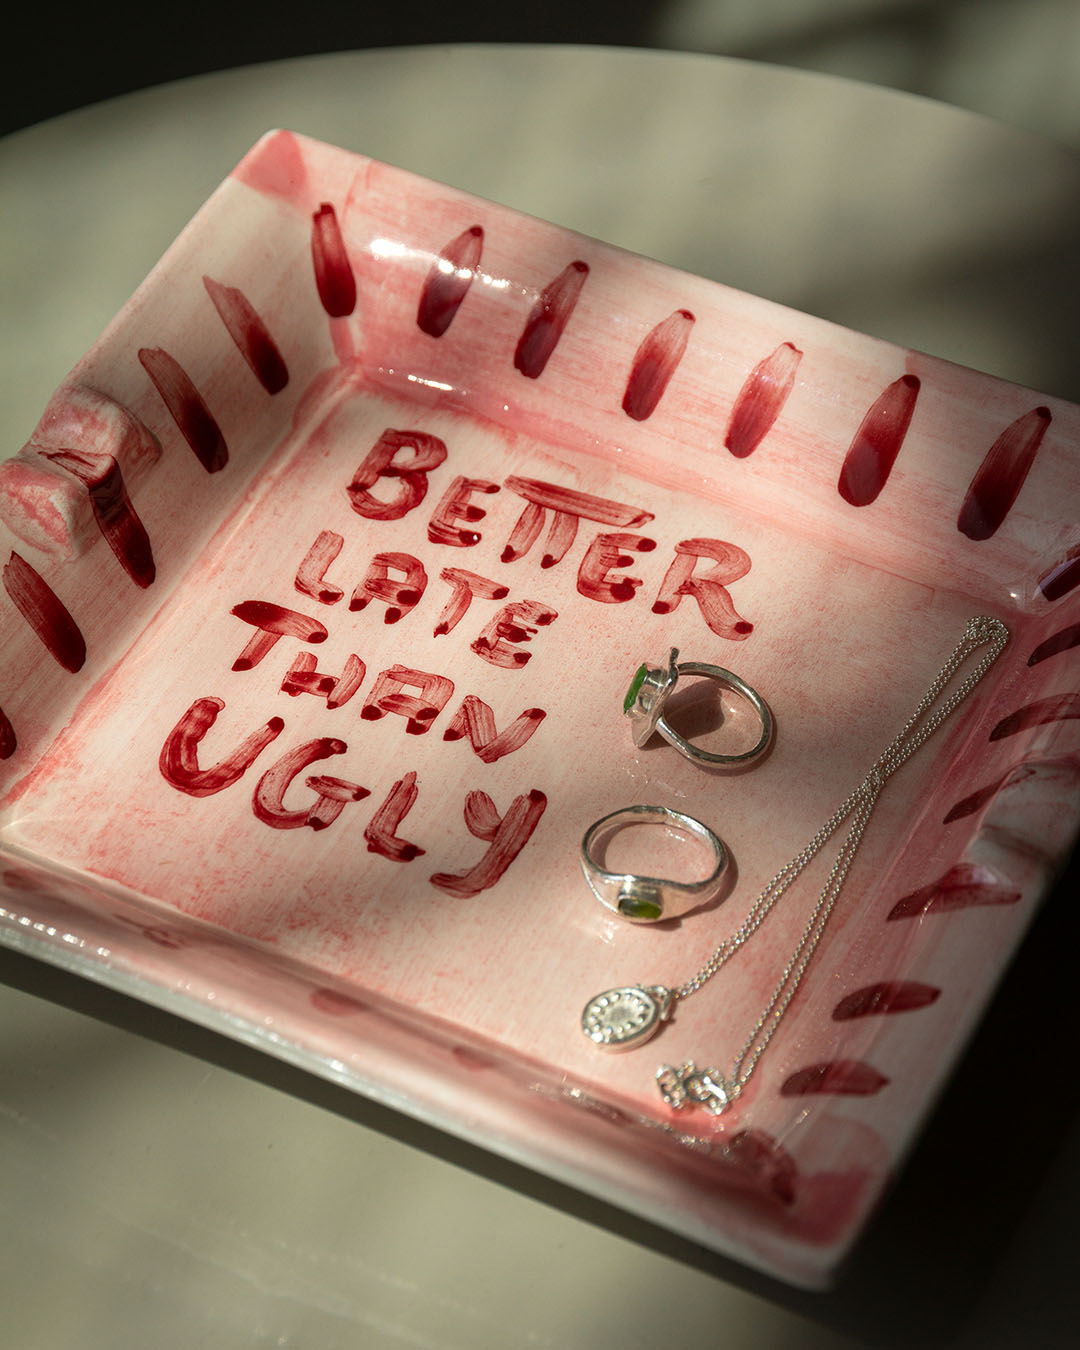 "Better Late than Ugly" catchall